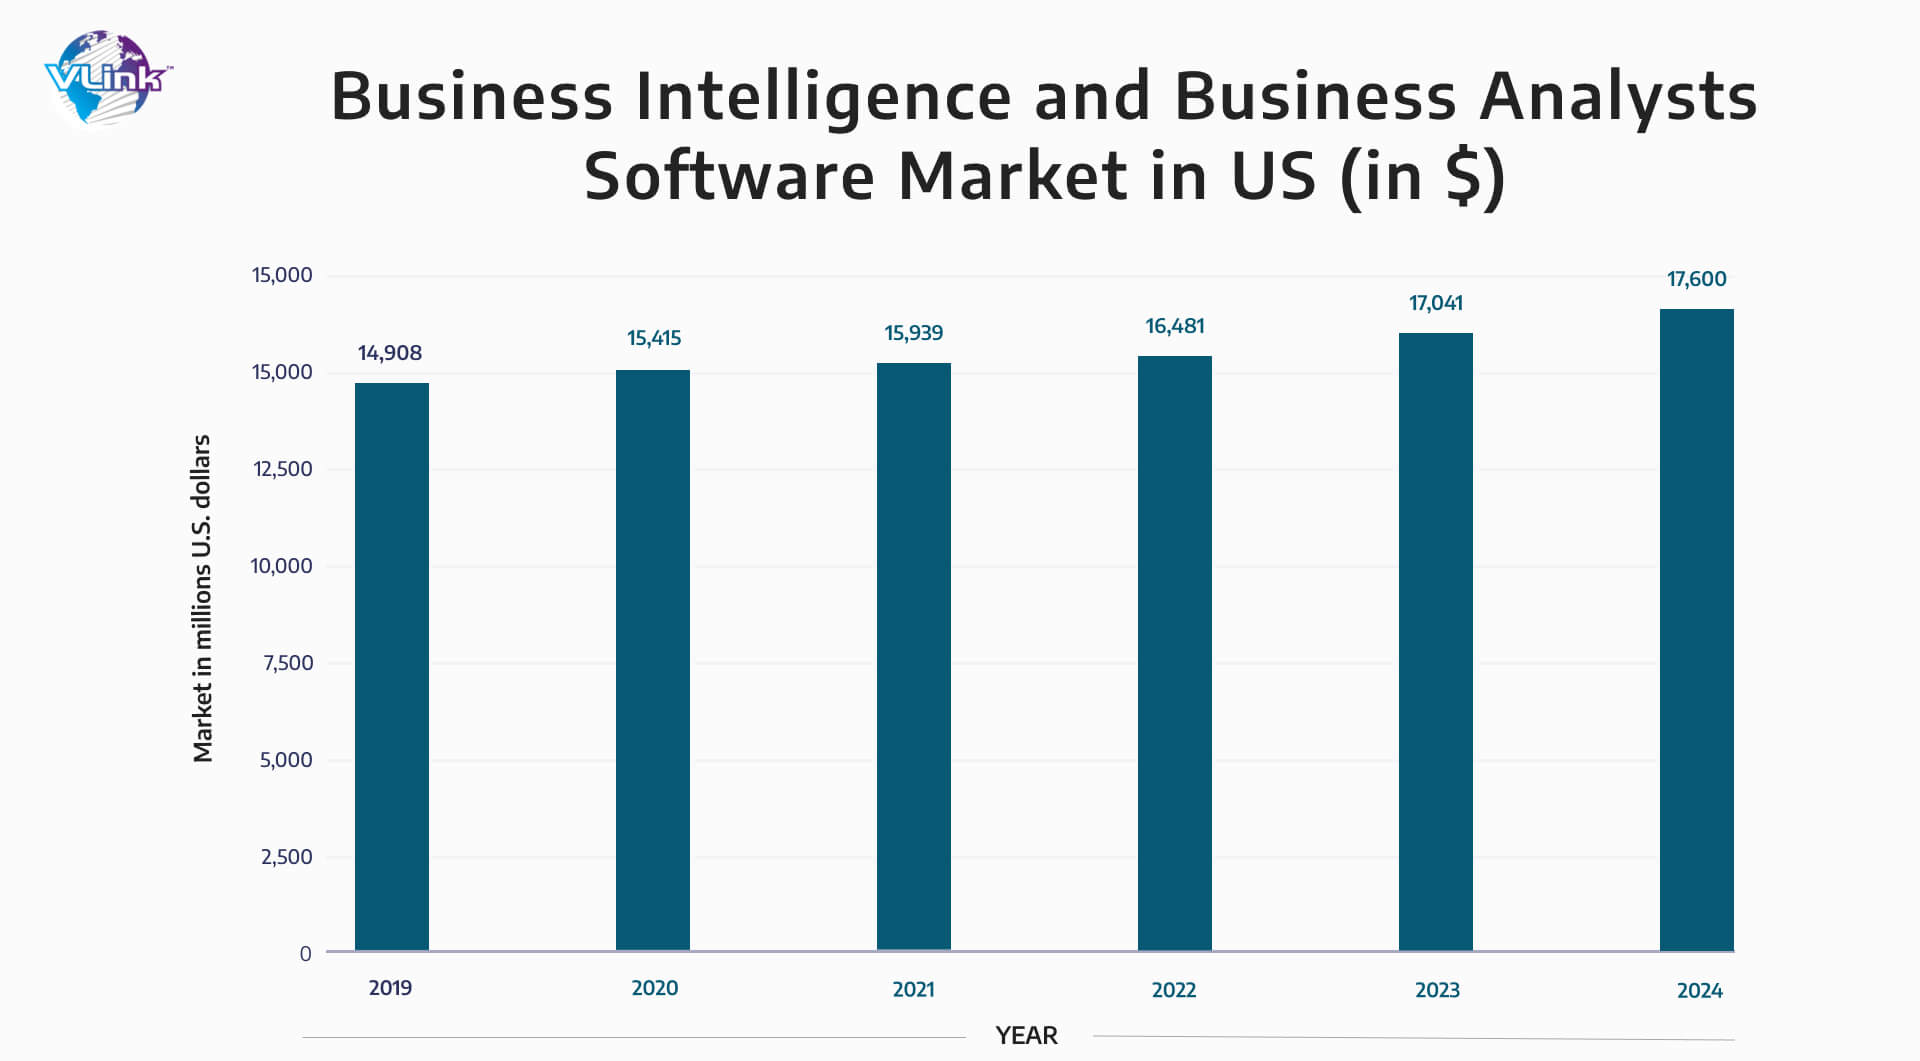 Business intelligence and Business Analysts Software Market in US